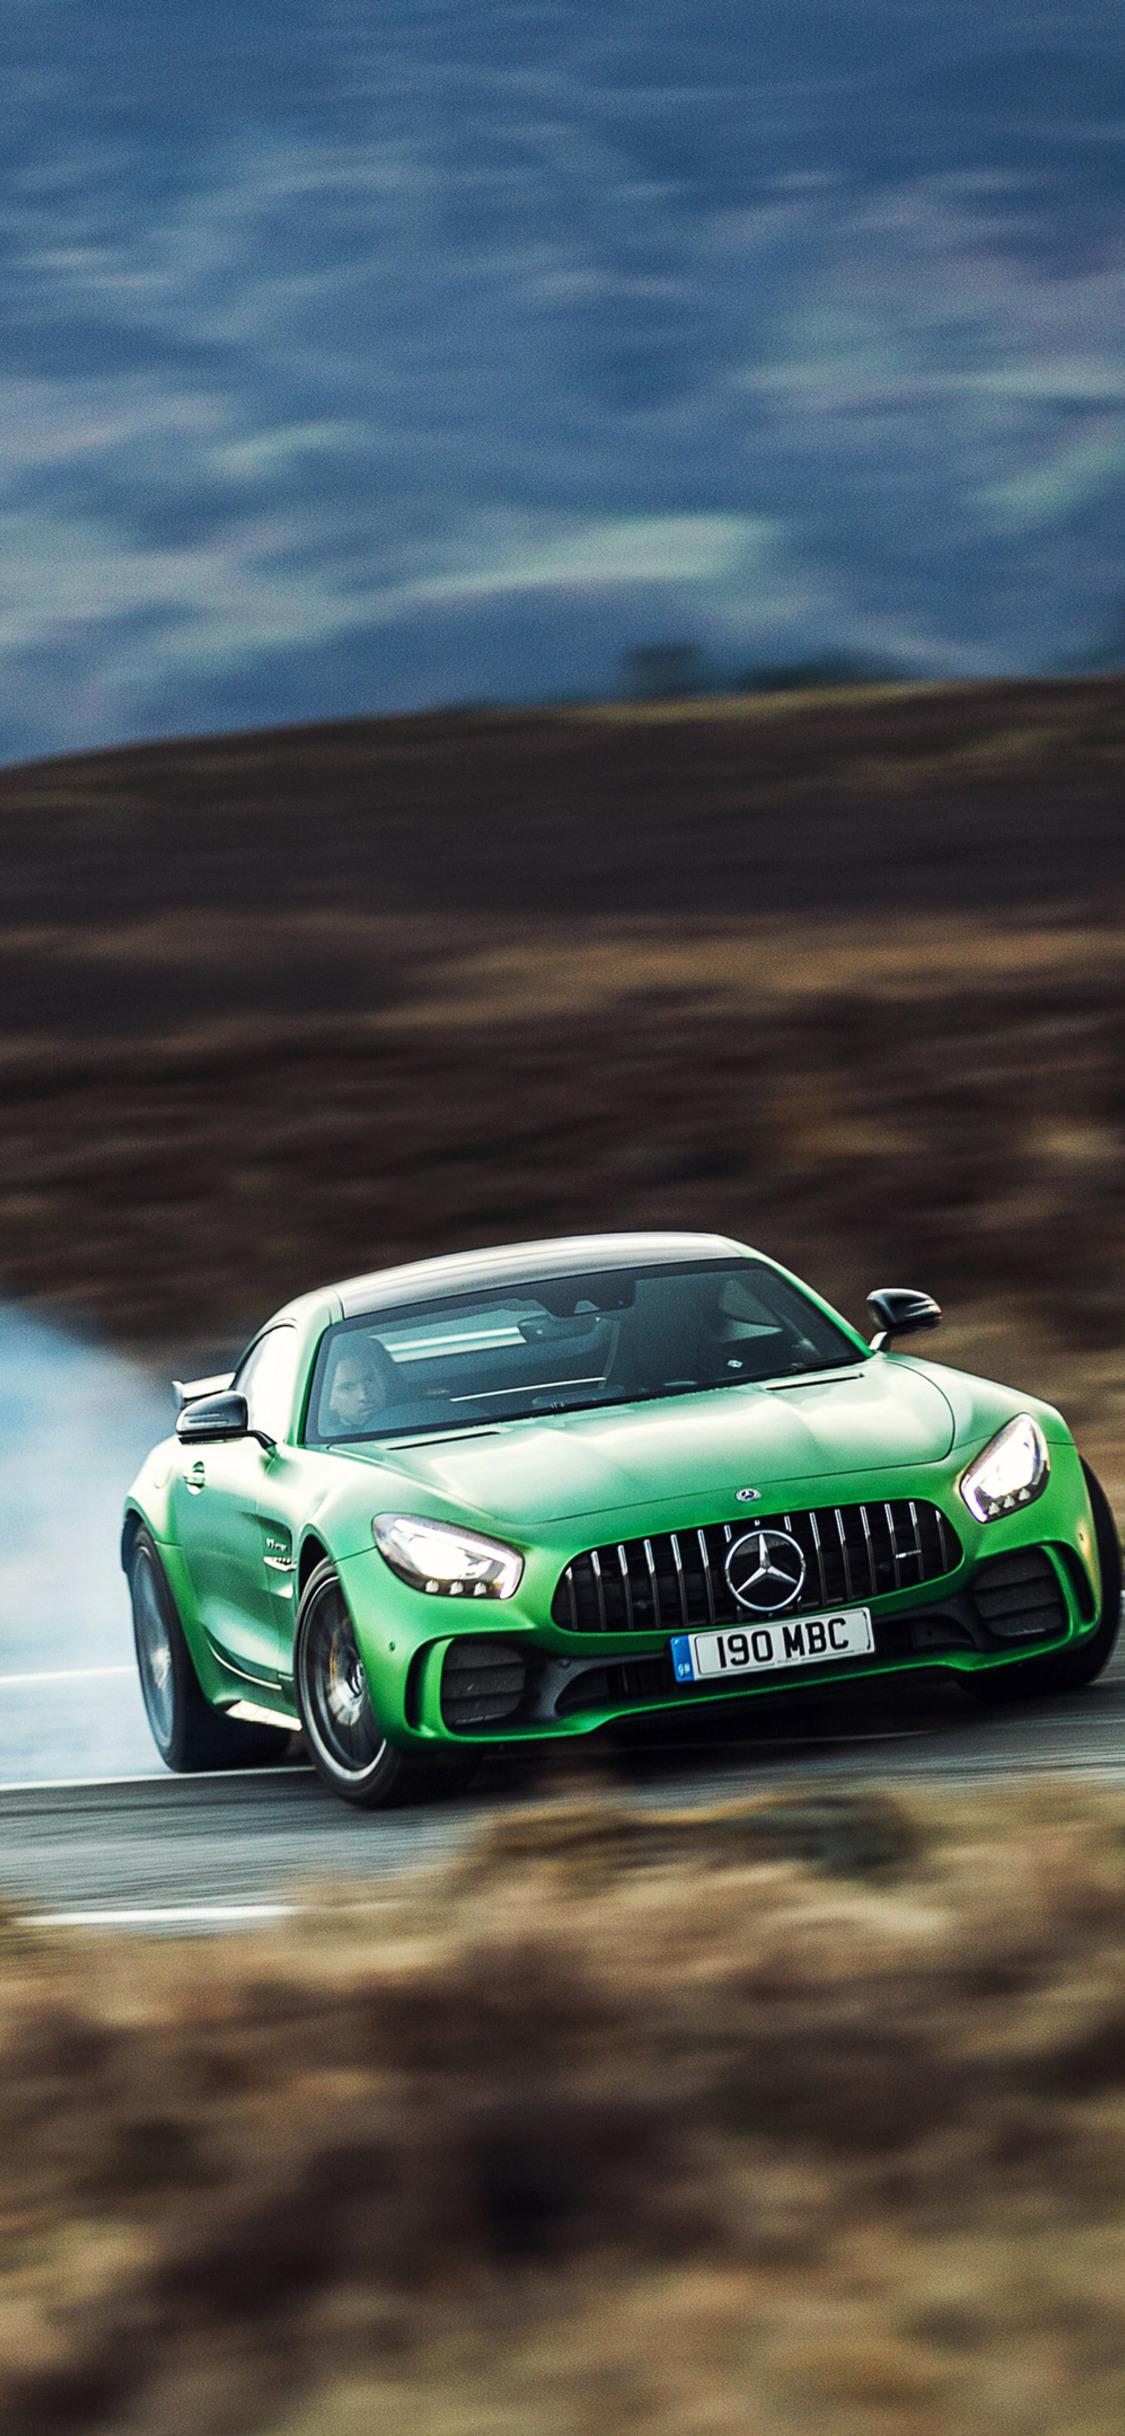 Download Amg Iphone Wallpaper Hd Backgrounds Download Itl Cat